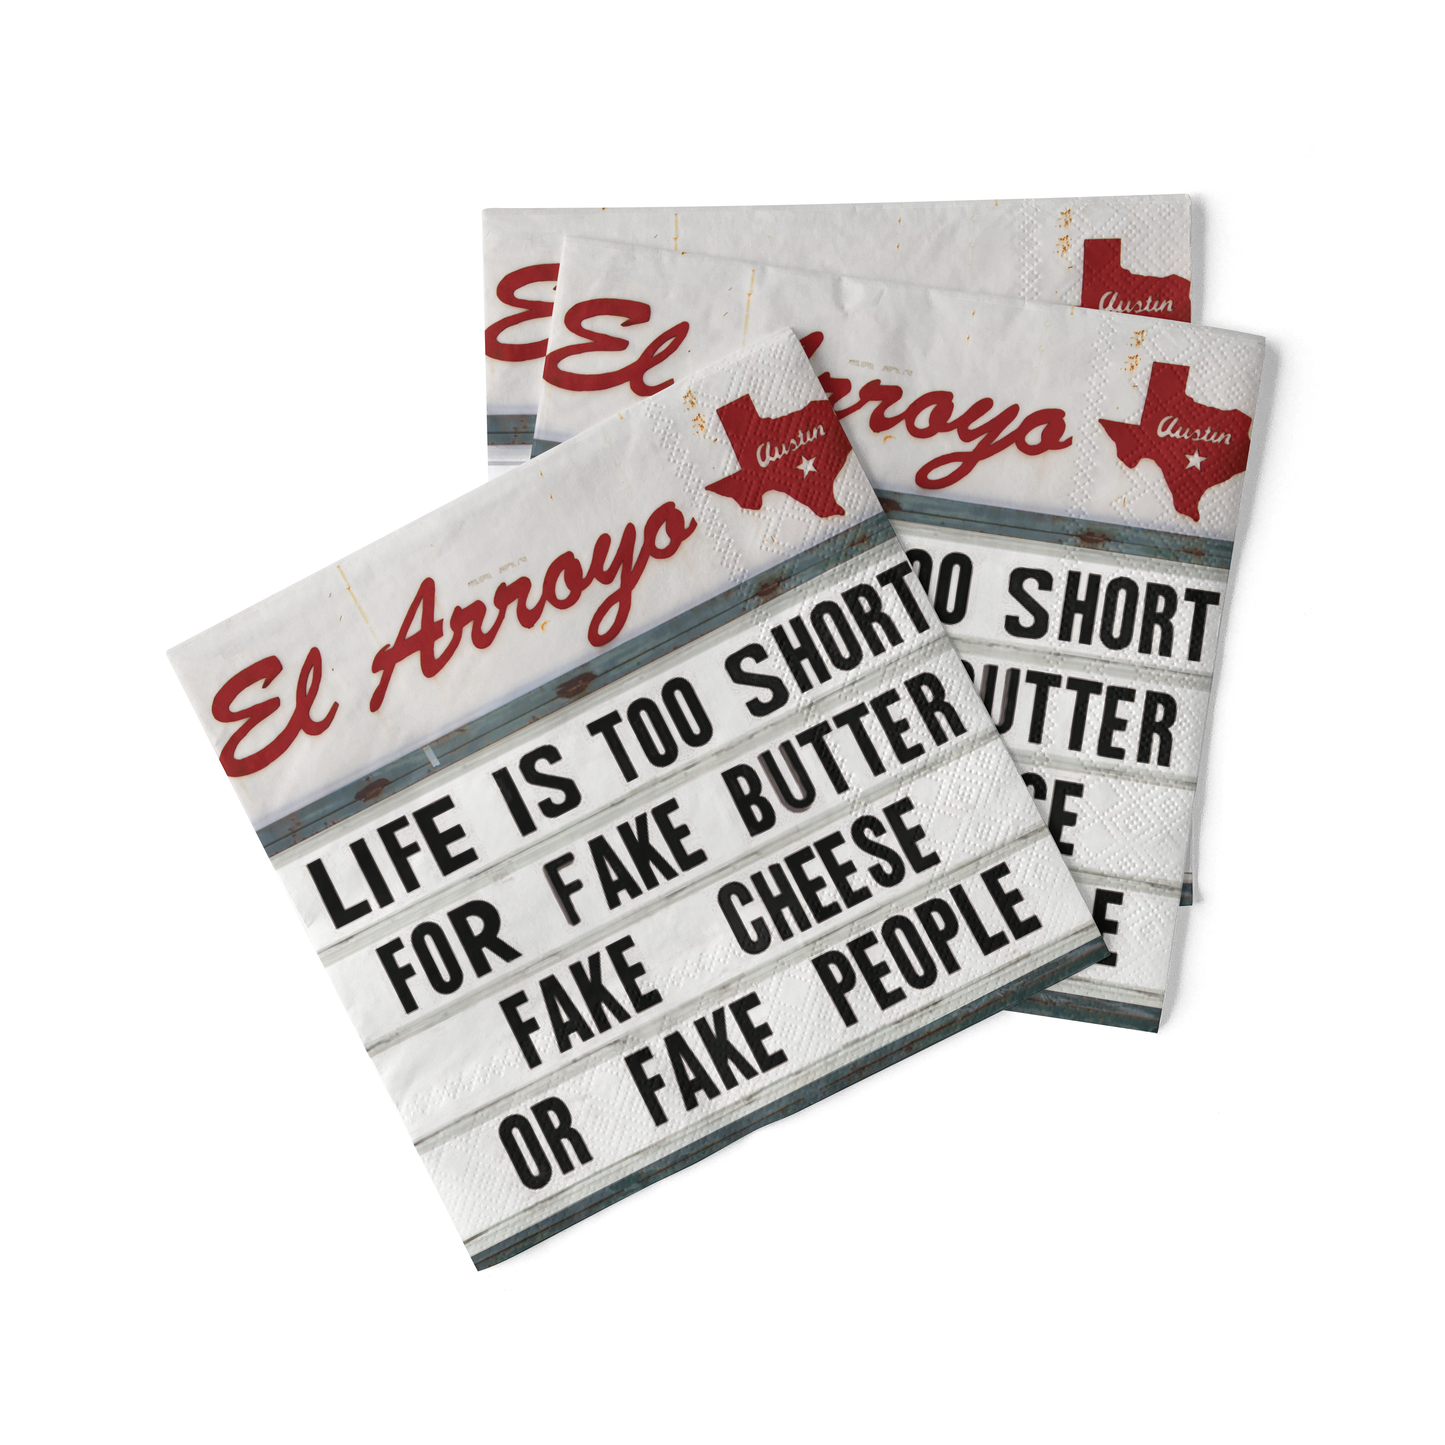 El Arroyo - Cocktail Napkins (Pack of 20) - Fake Cheese